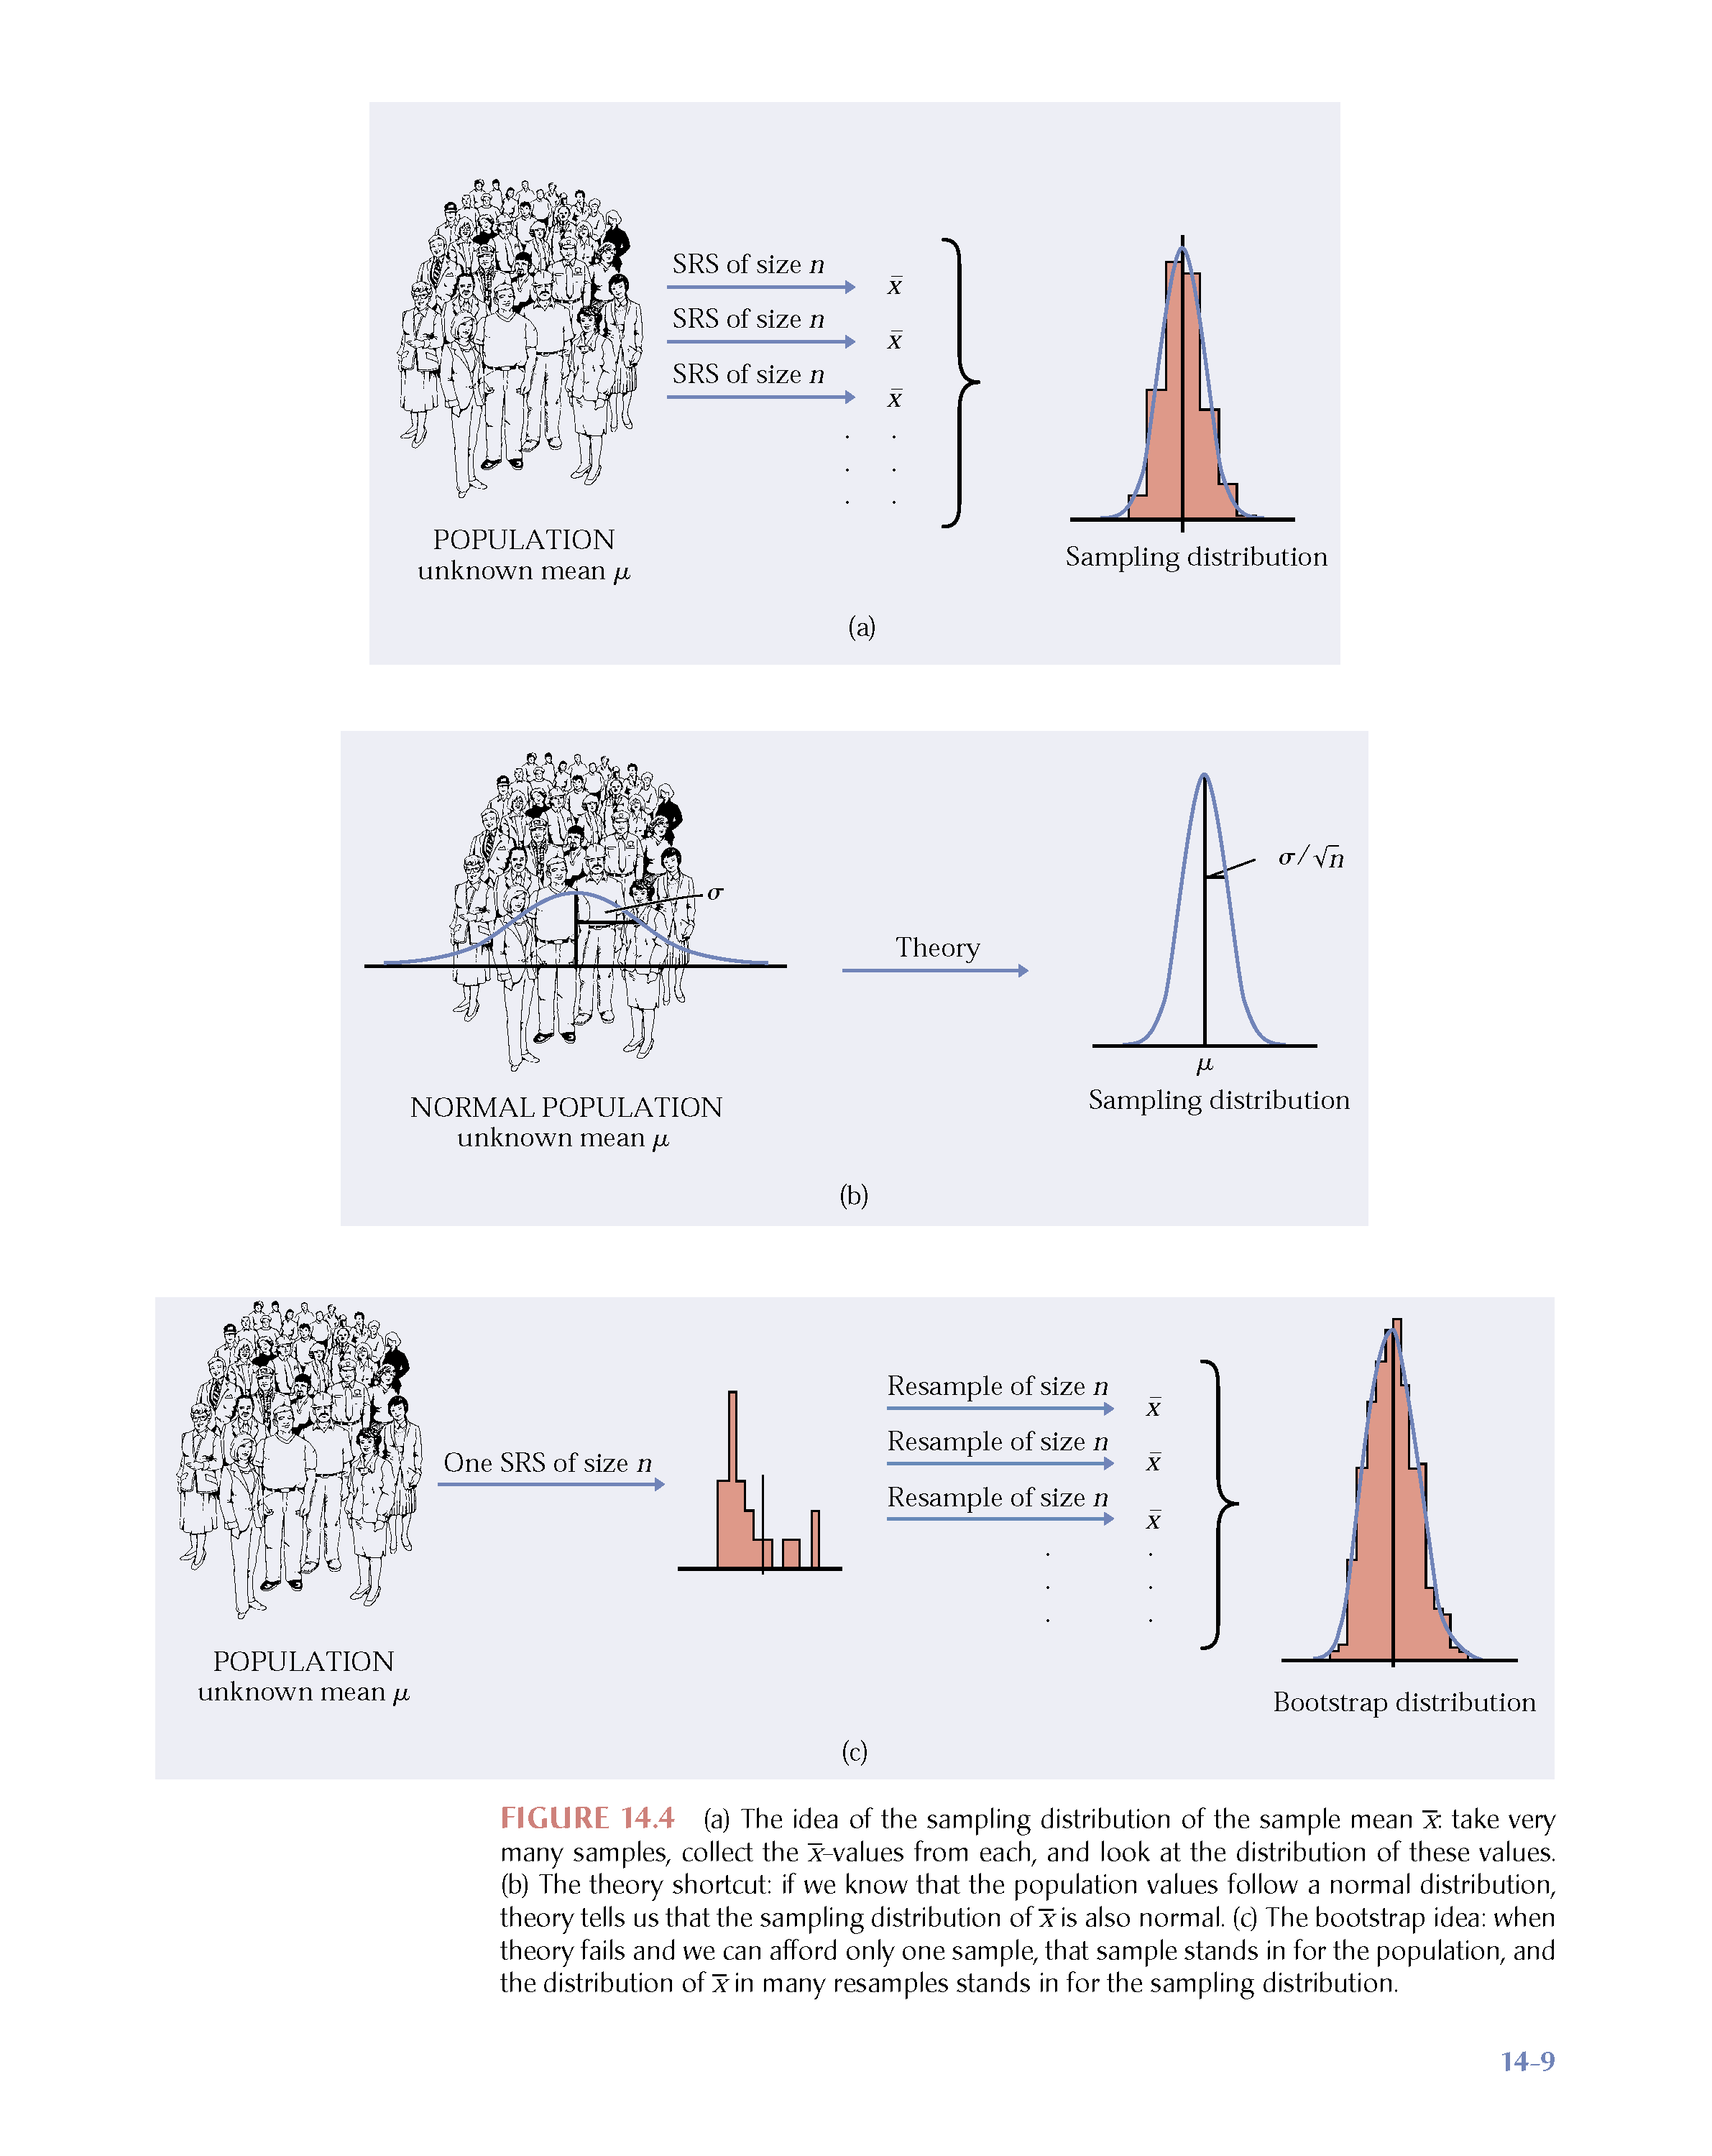 Image credit: Hesterberg: supplemental chapter for Introduction to the Practice of Statistics, 5th Edition by Moore and McCabe.  https://www.timhesterberg.net/bootstrap-and-resampling